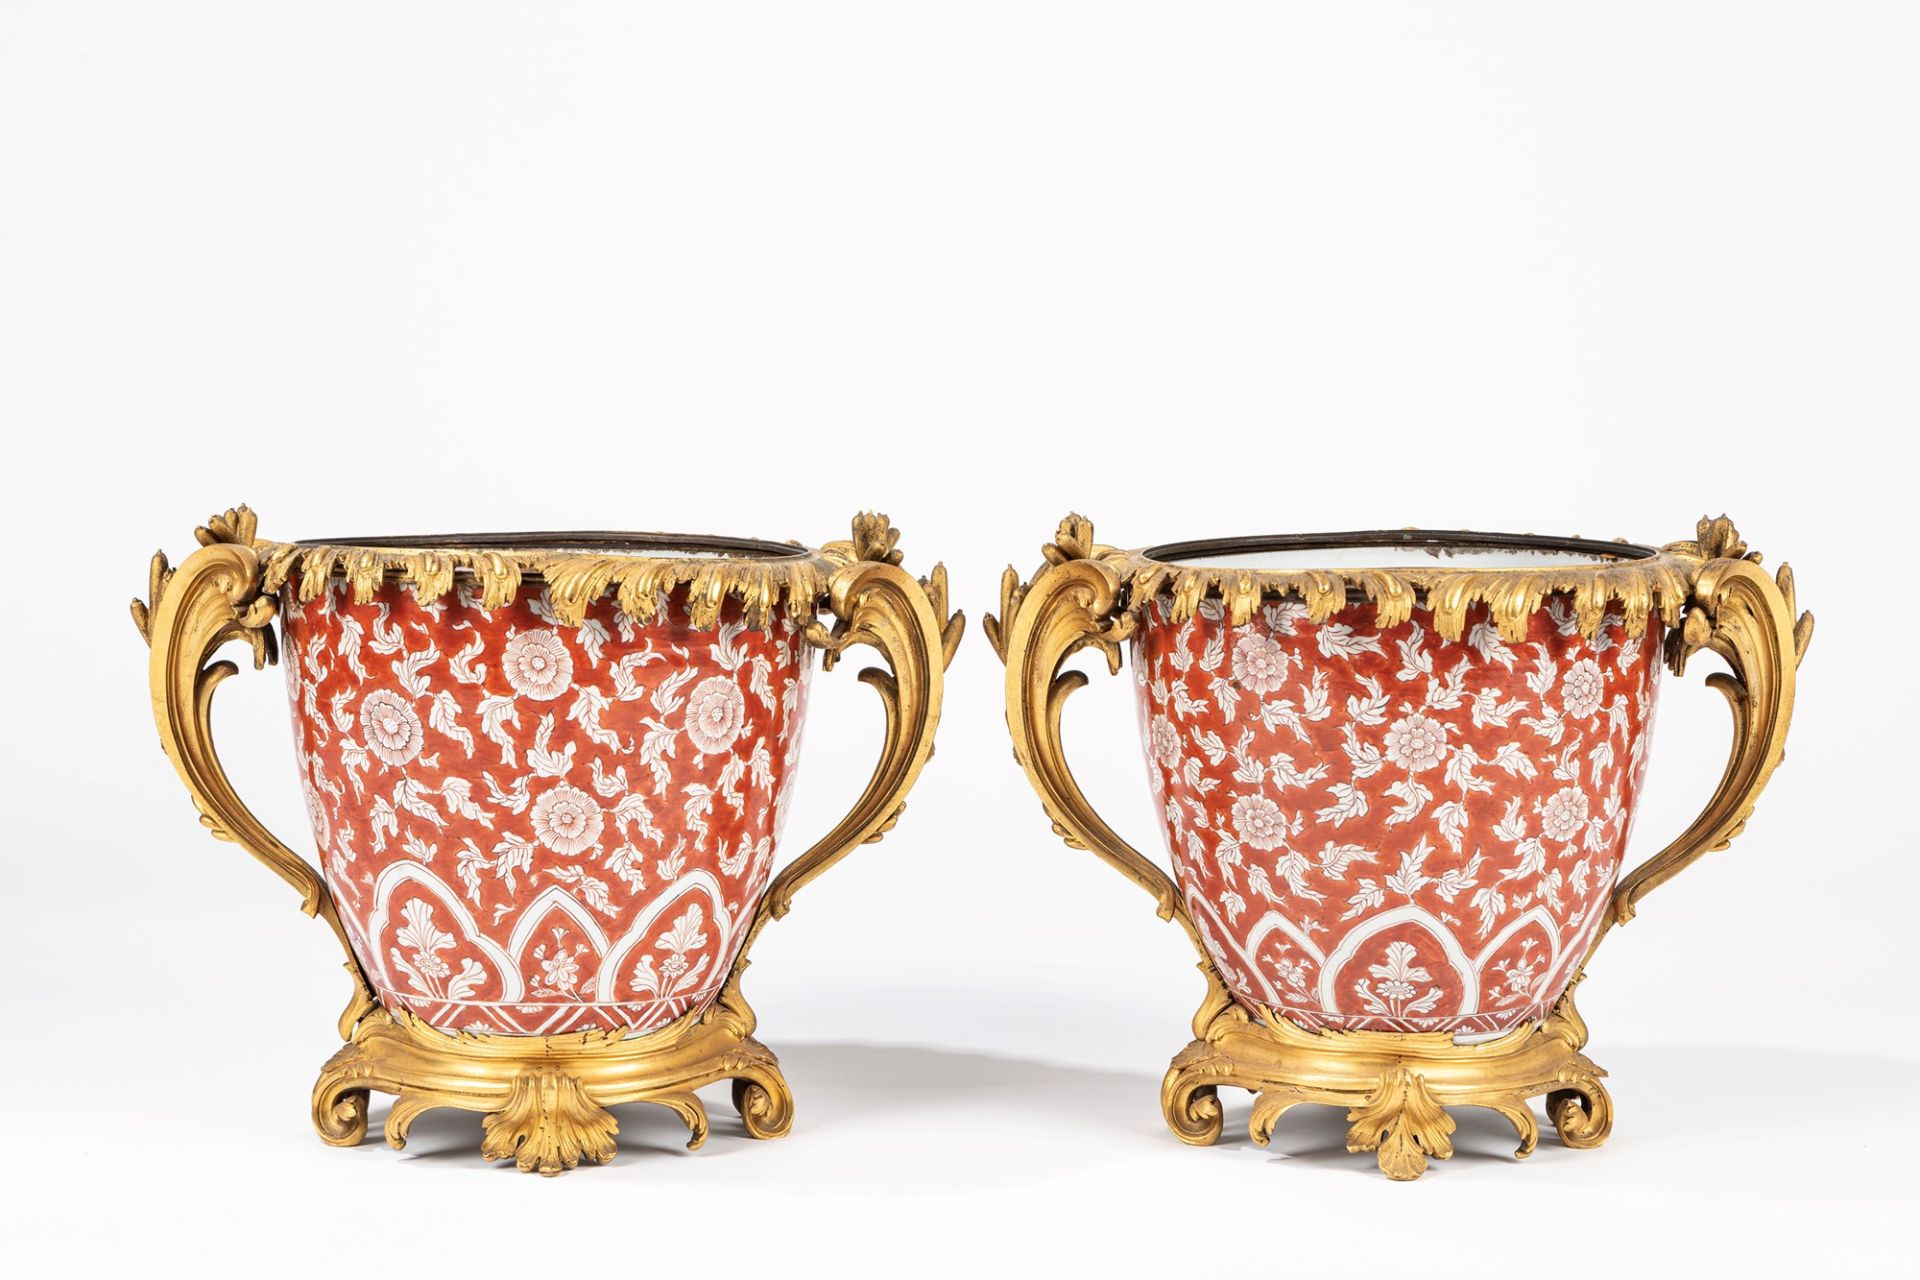 A pair of large gilt-mounted jardinieres, the porcelain Kangxi period, the mounts 19th c.